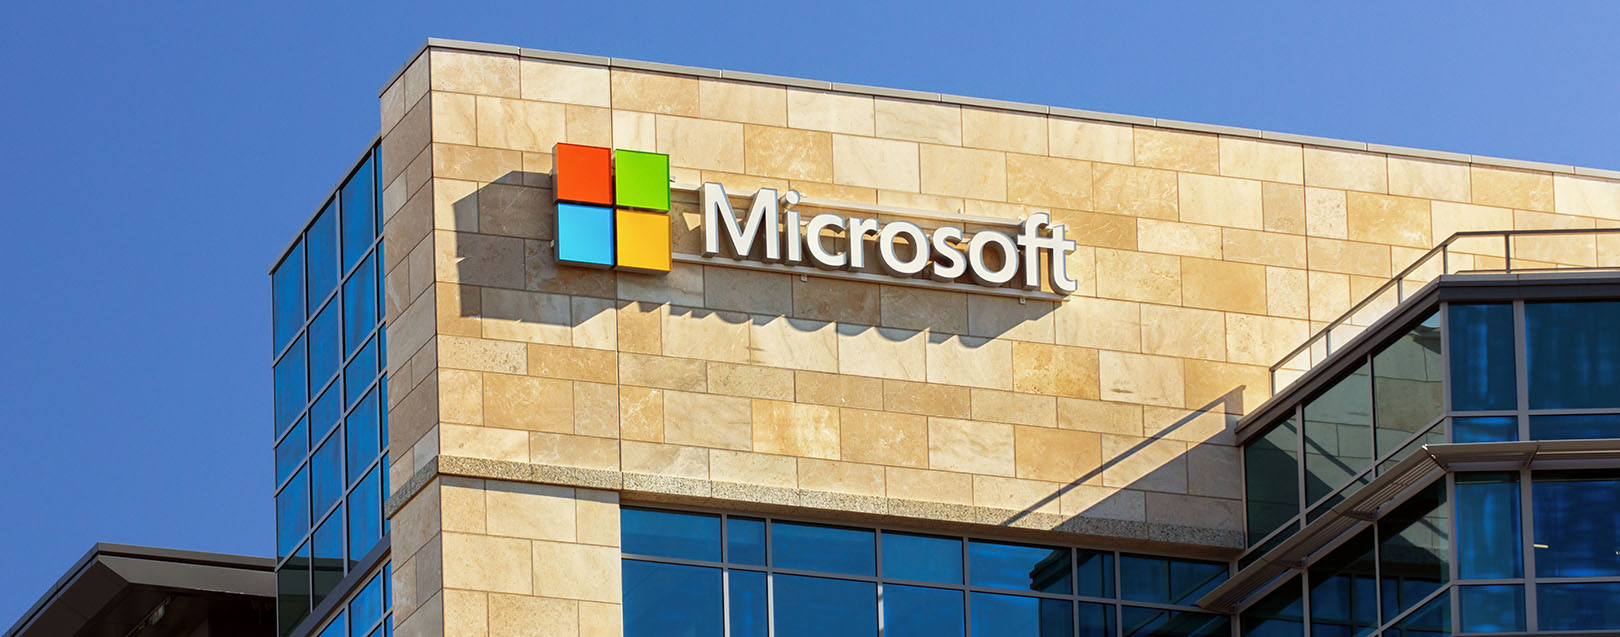 Microsoft opens Cyber Security Centre in Gurgaon